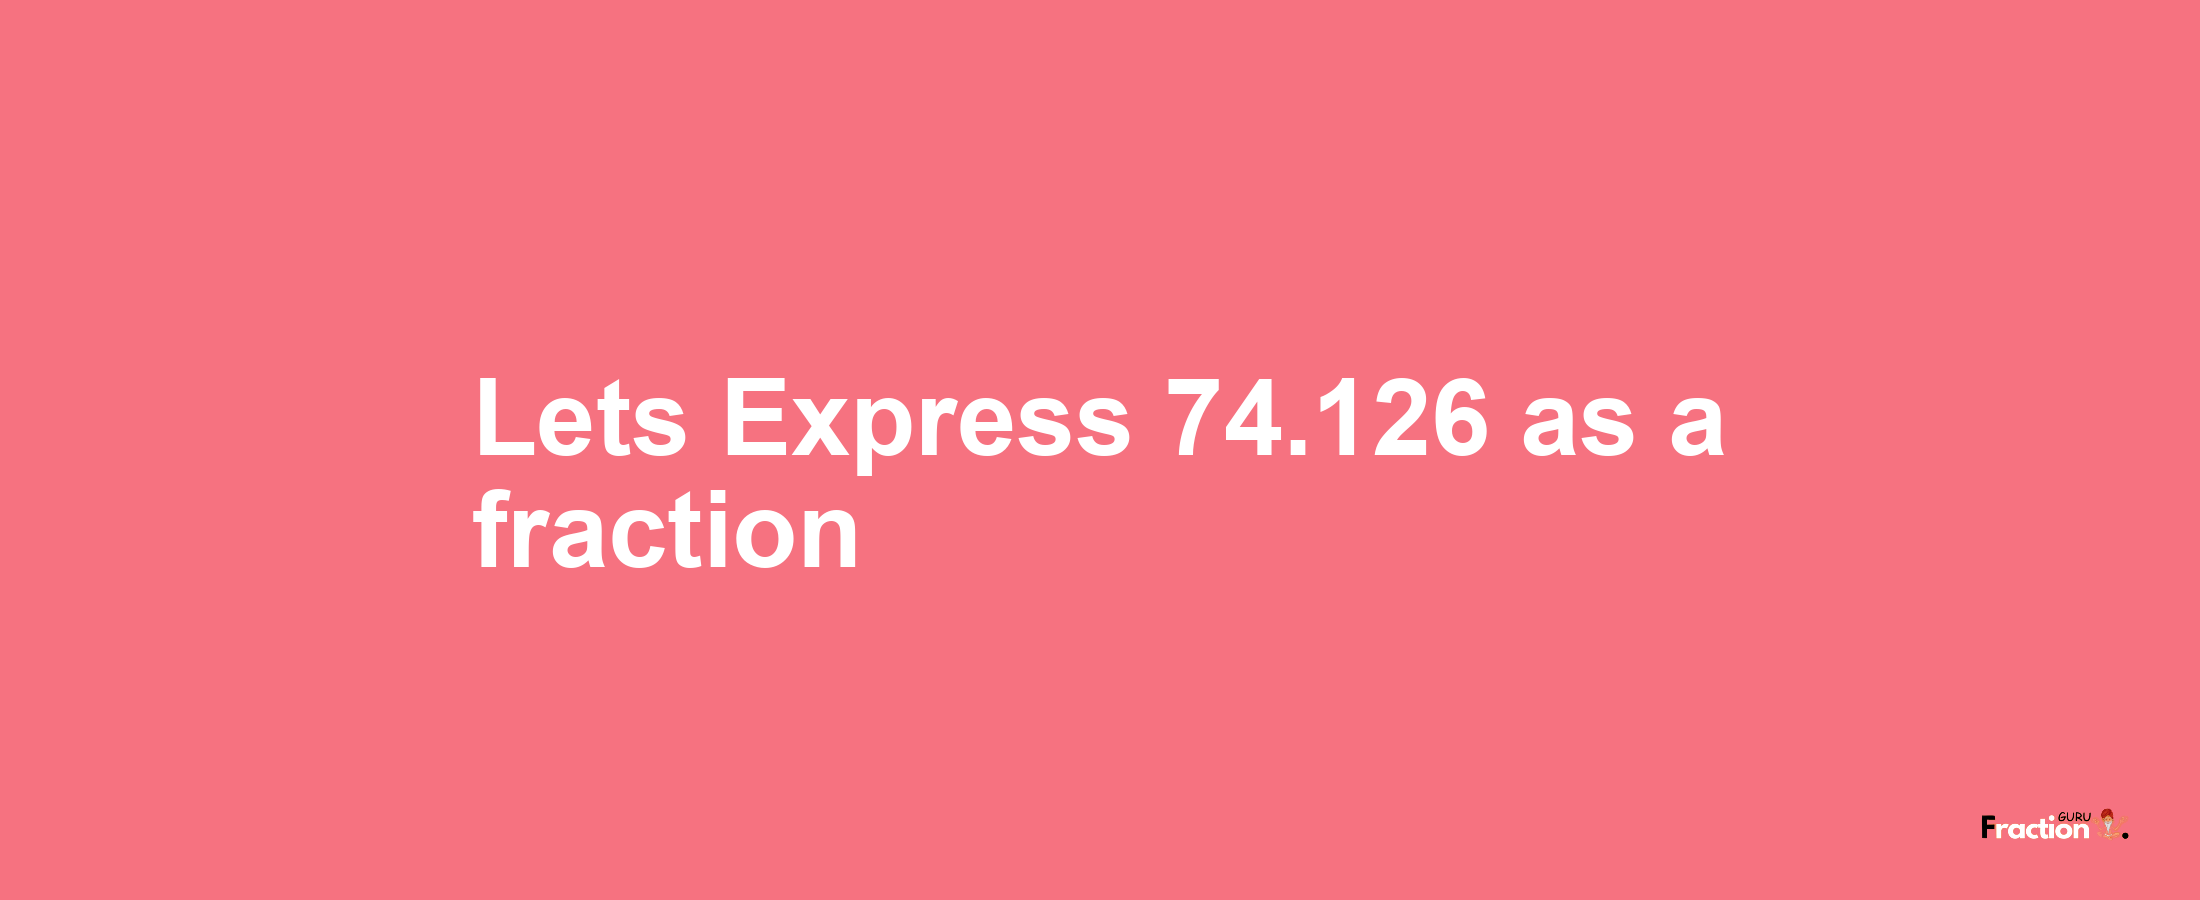 Lets Express 74.126 as afraction